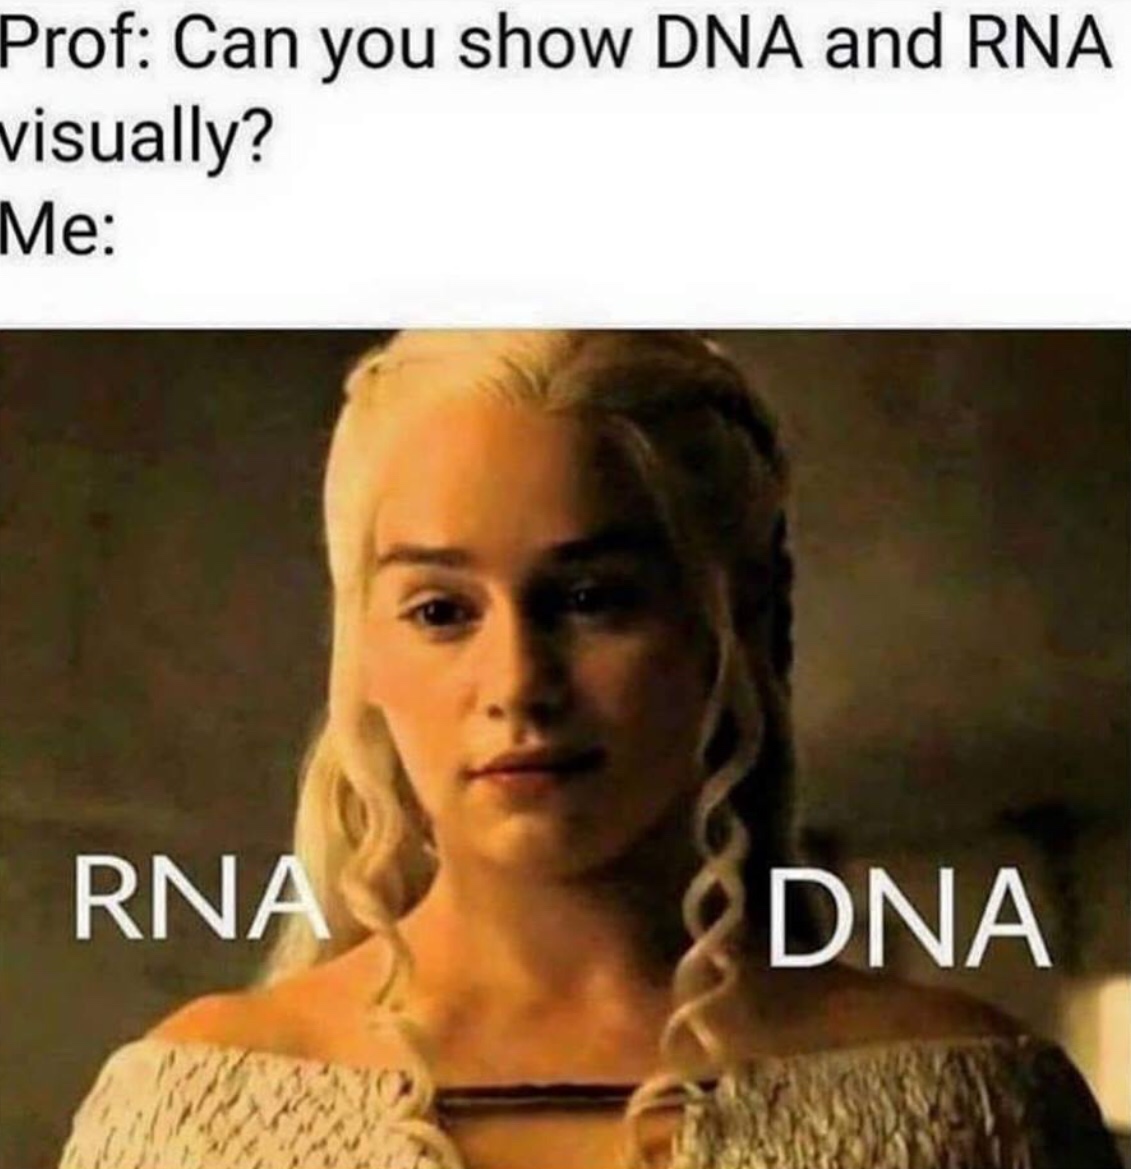 rna dna meme - Prof Can you show Dna and Rna visually? Me Rna Dna